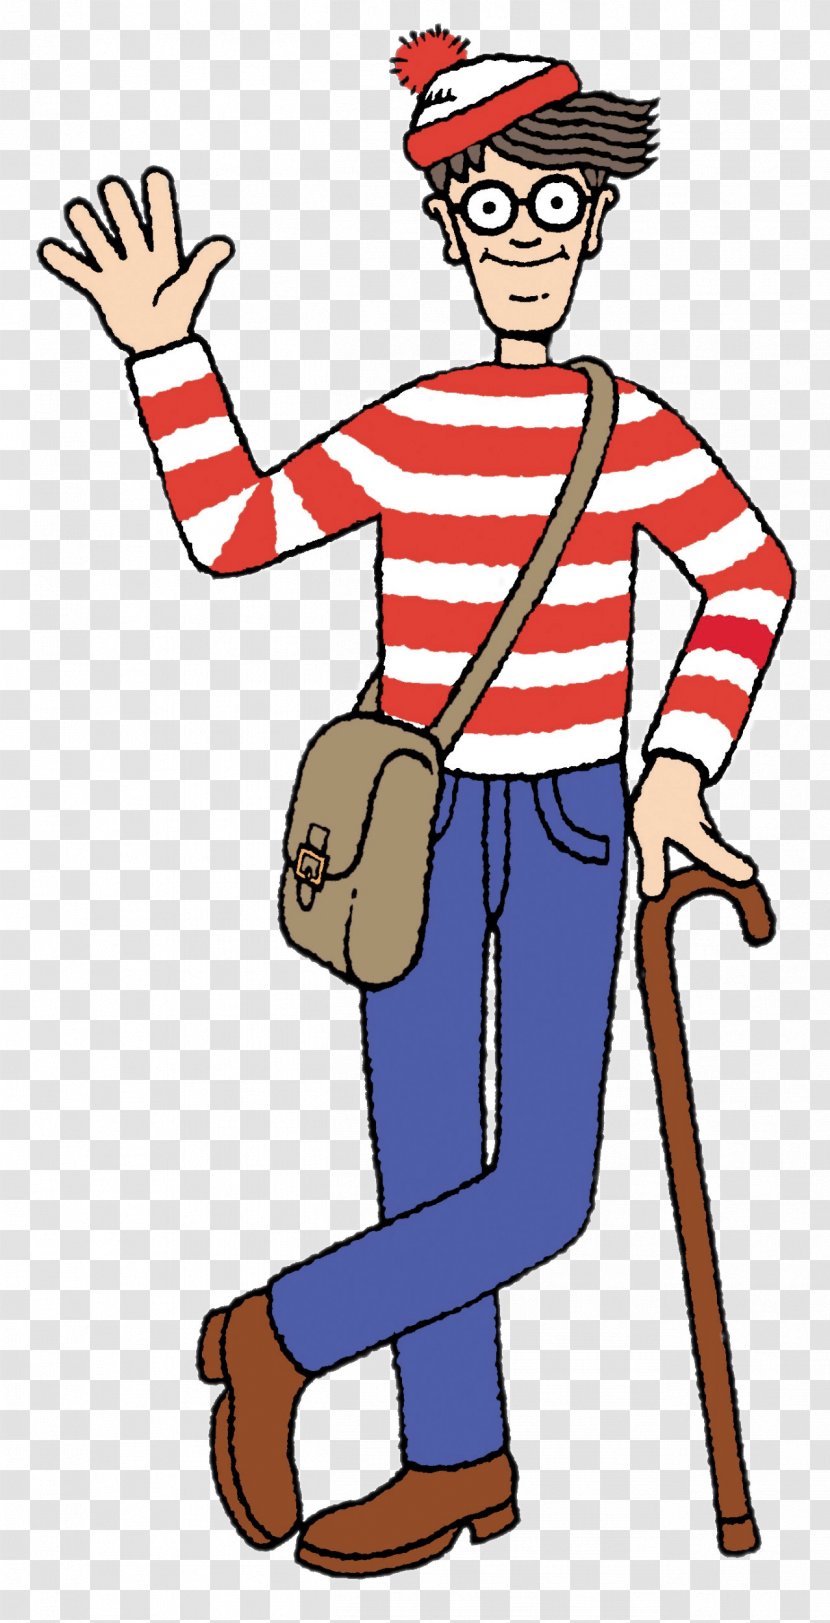 Where's Wally? United Kingdom Children's Literature Book Game - Walker Books - Goodbye Transparent PNG